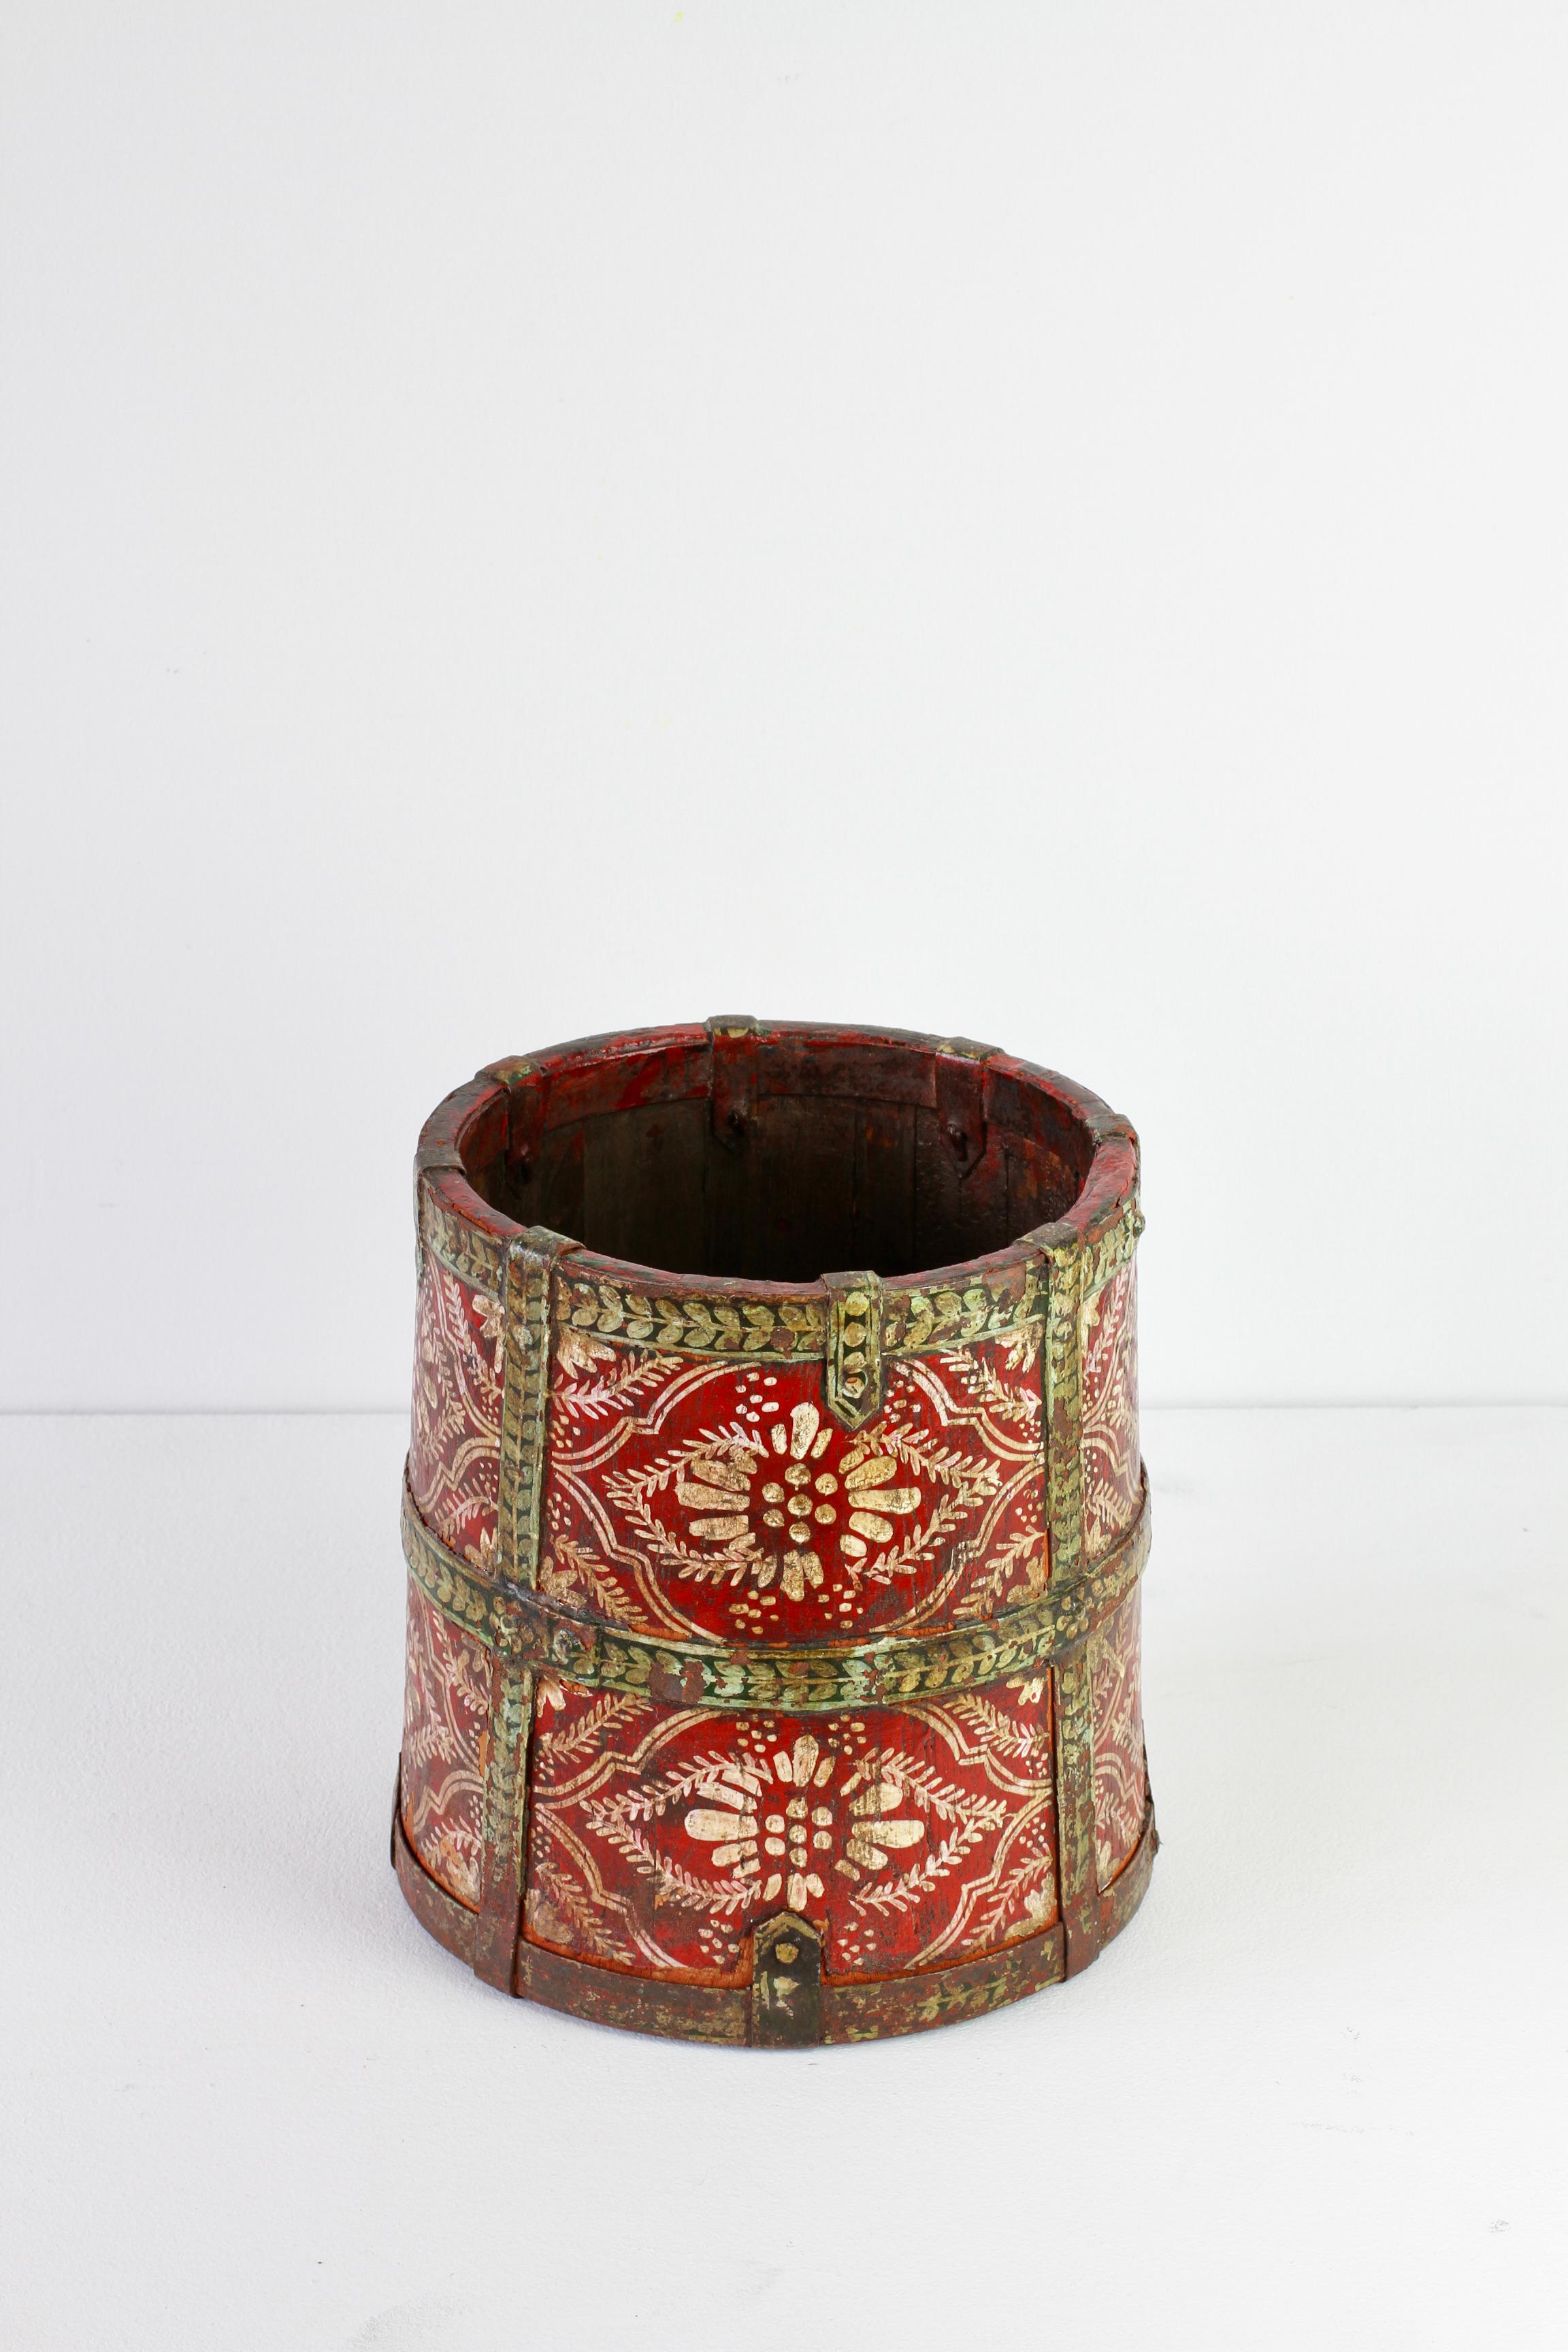 Hand Painted Antique Oak Staved Red Wooden Bucket circa 1850  6